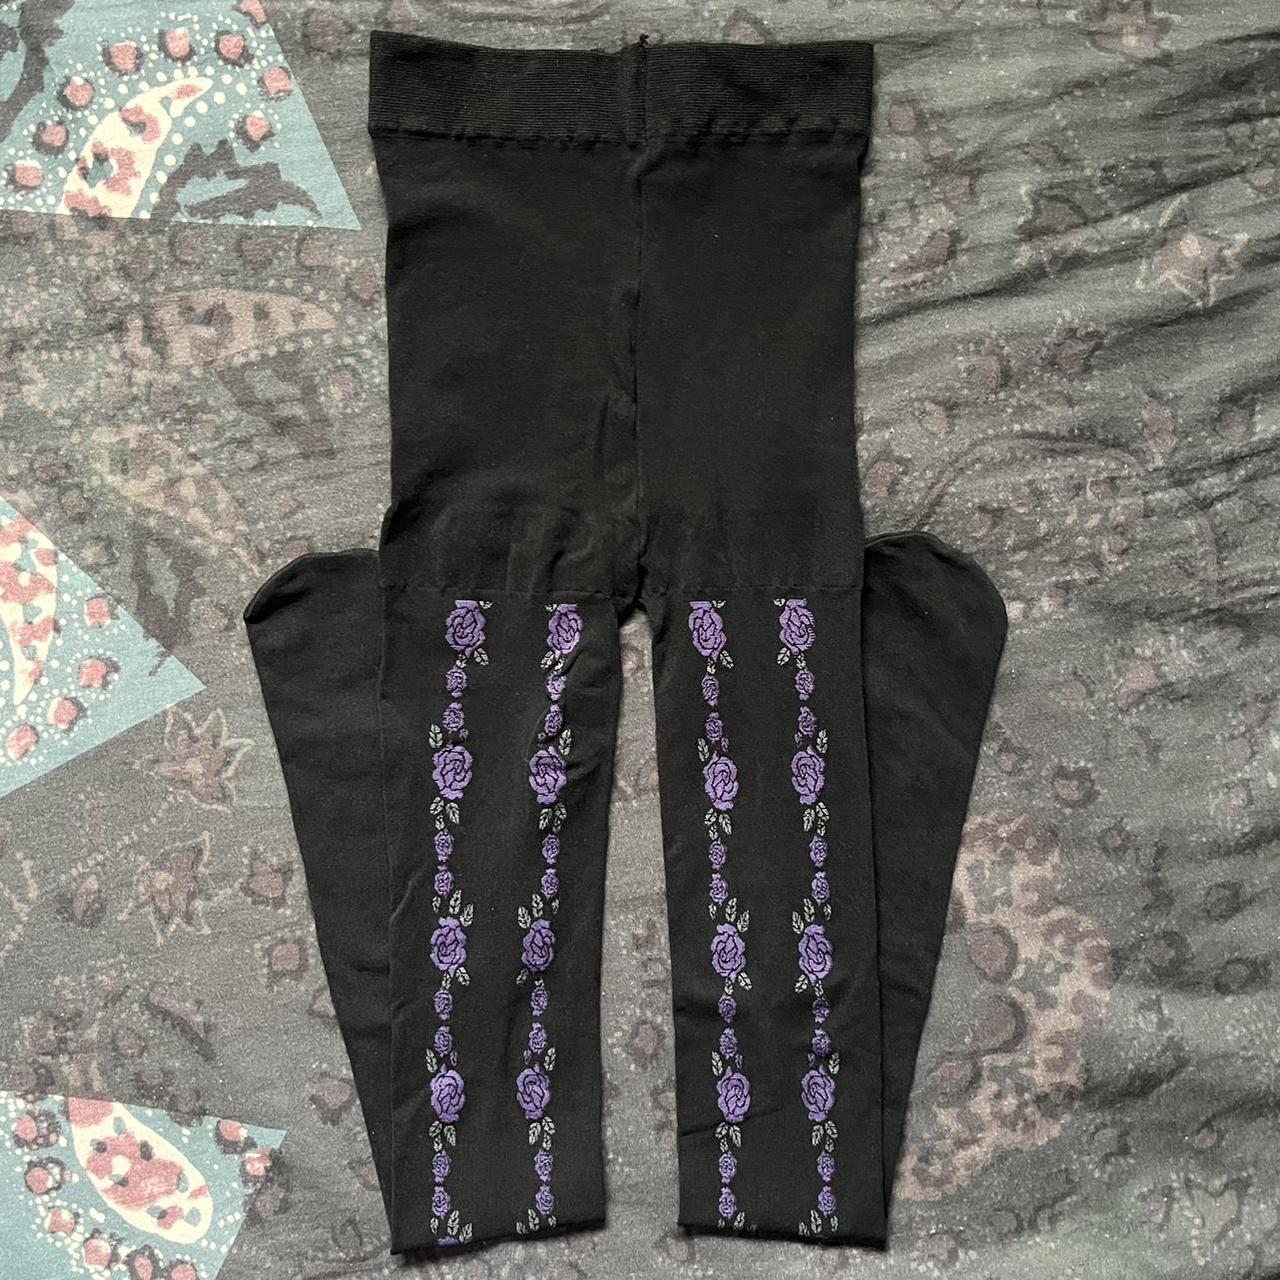 Anna Sui Women's Purple and Black Hosiery-tights